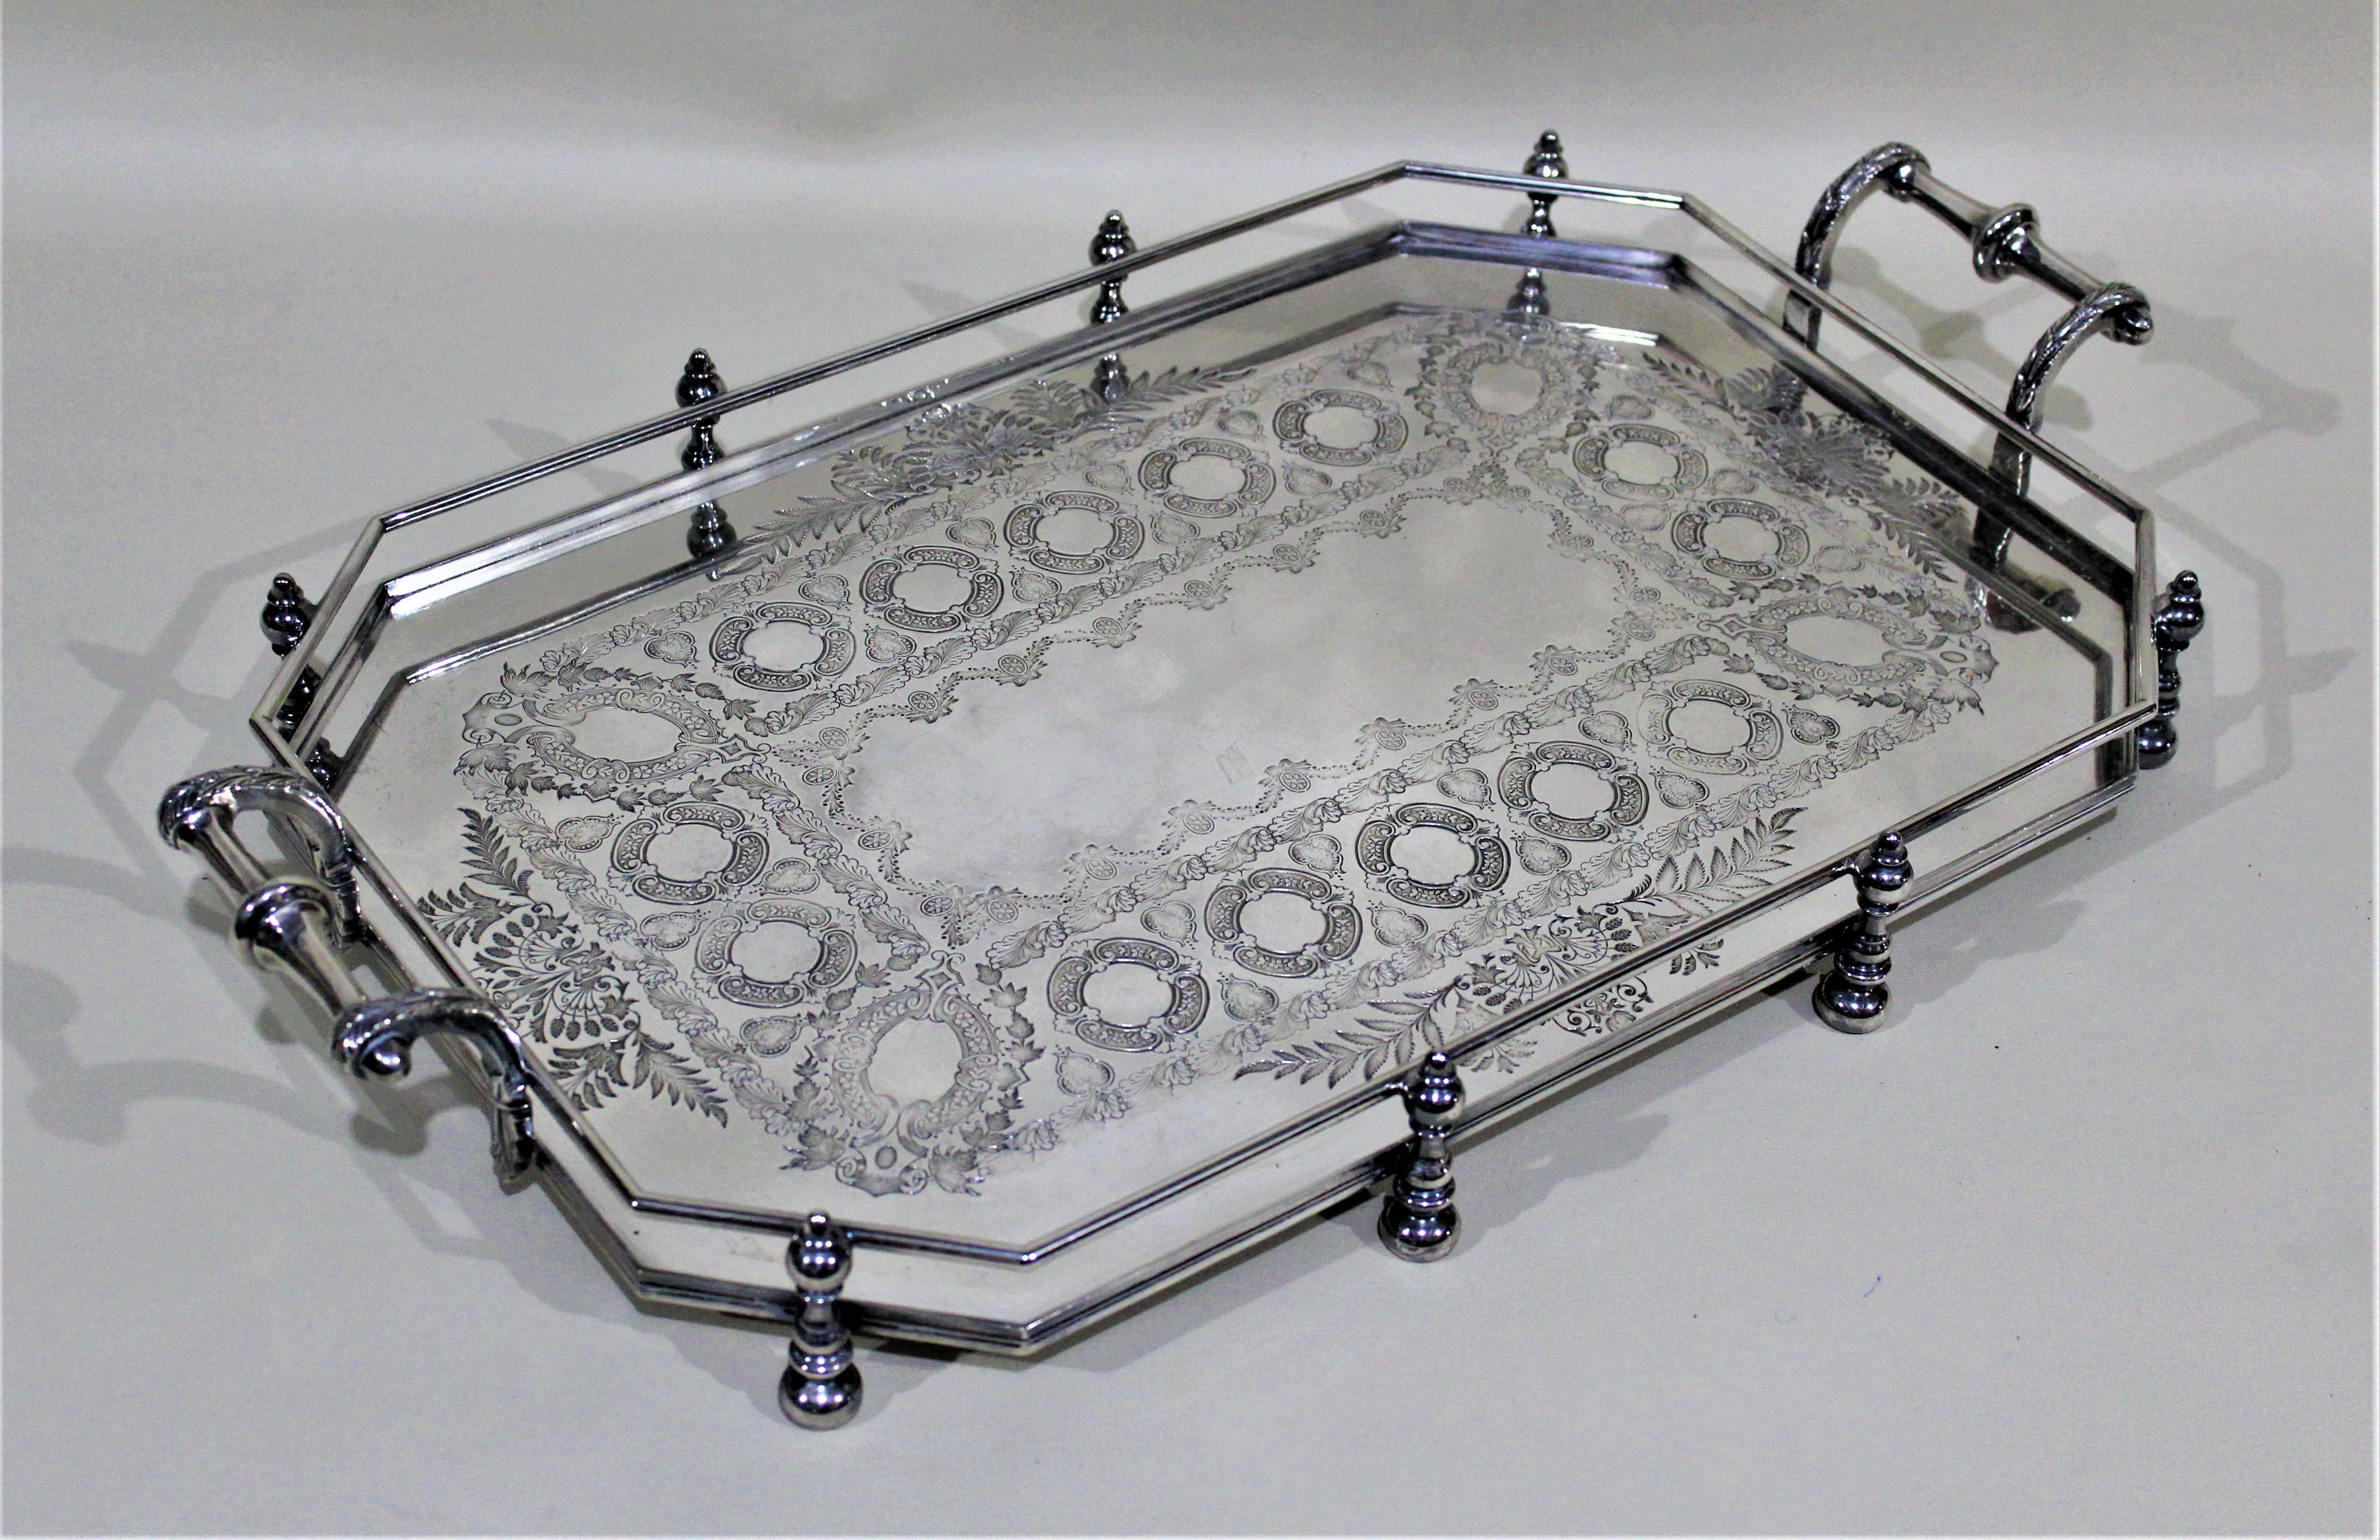 Dating from the early 20th century and made by the well known makers Walker & Ross of Sheffield England, this silver plated gallery tray has a very bold post and rail styled construction, and a highly engraved top. The bottom of each post is